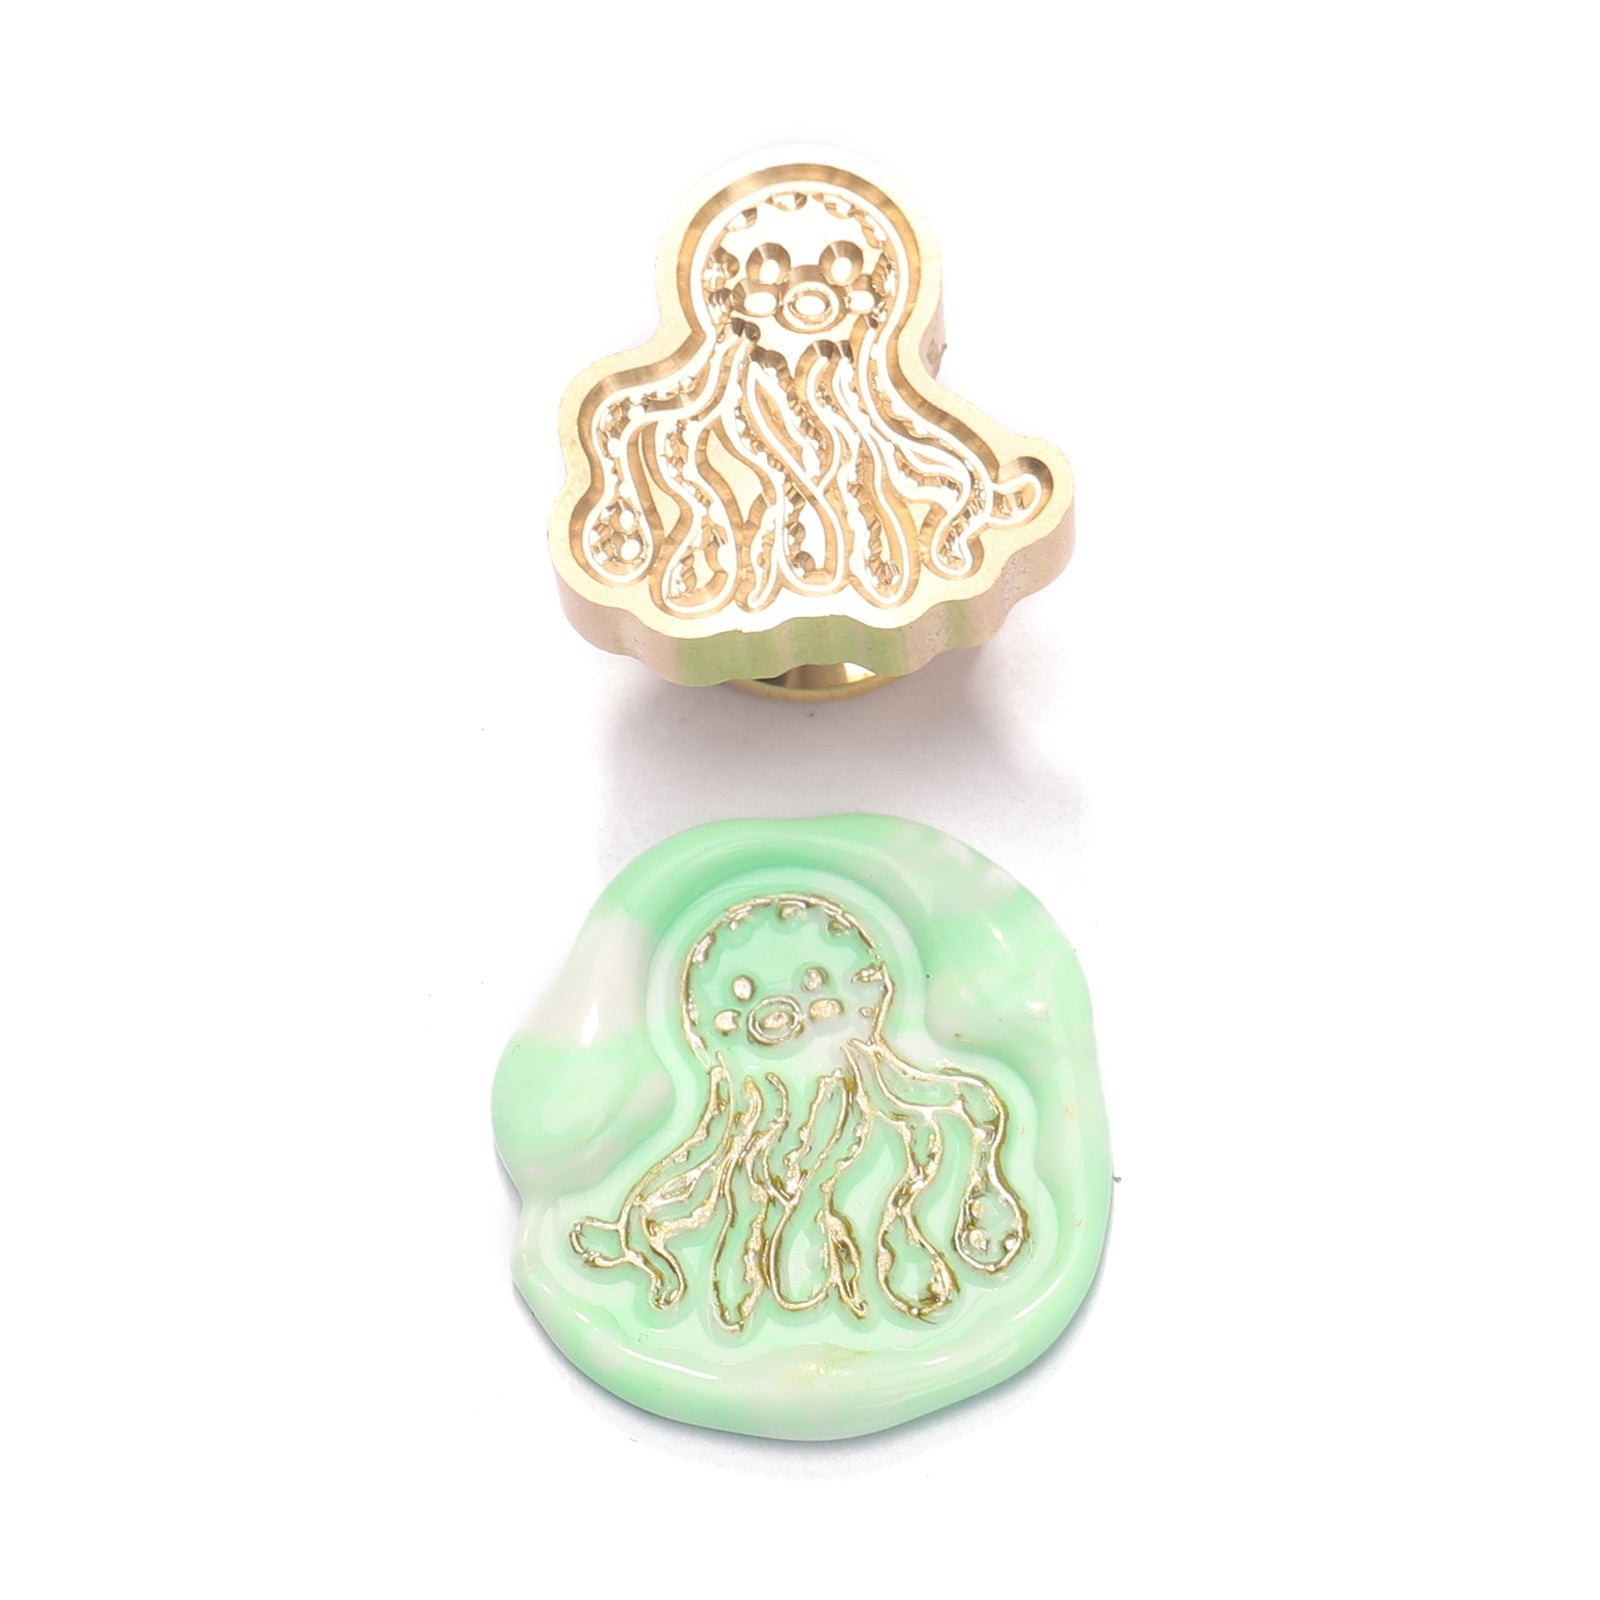 Octopus Pattern Shaped Wax Seal Stamps